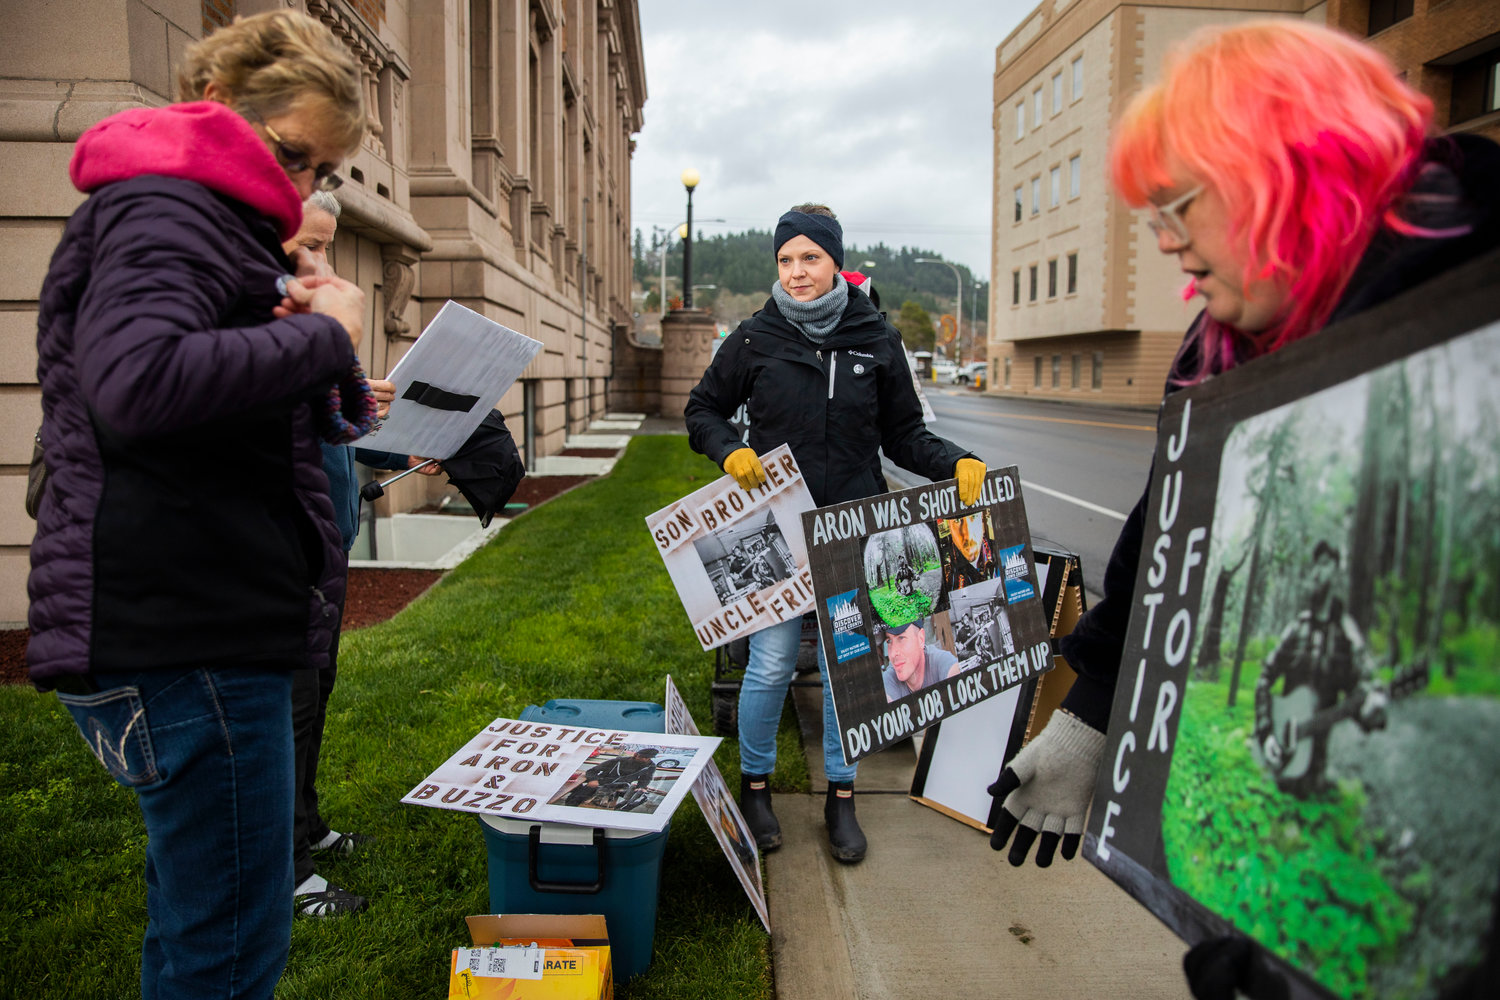 Supporters pick up signs outside the Lewis County Courthouse while demanding justice for Aron Christensen and his dog Buzzo in Chehalis on Sunday.